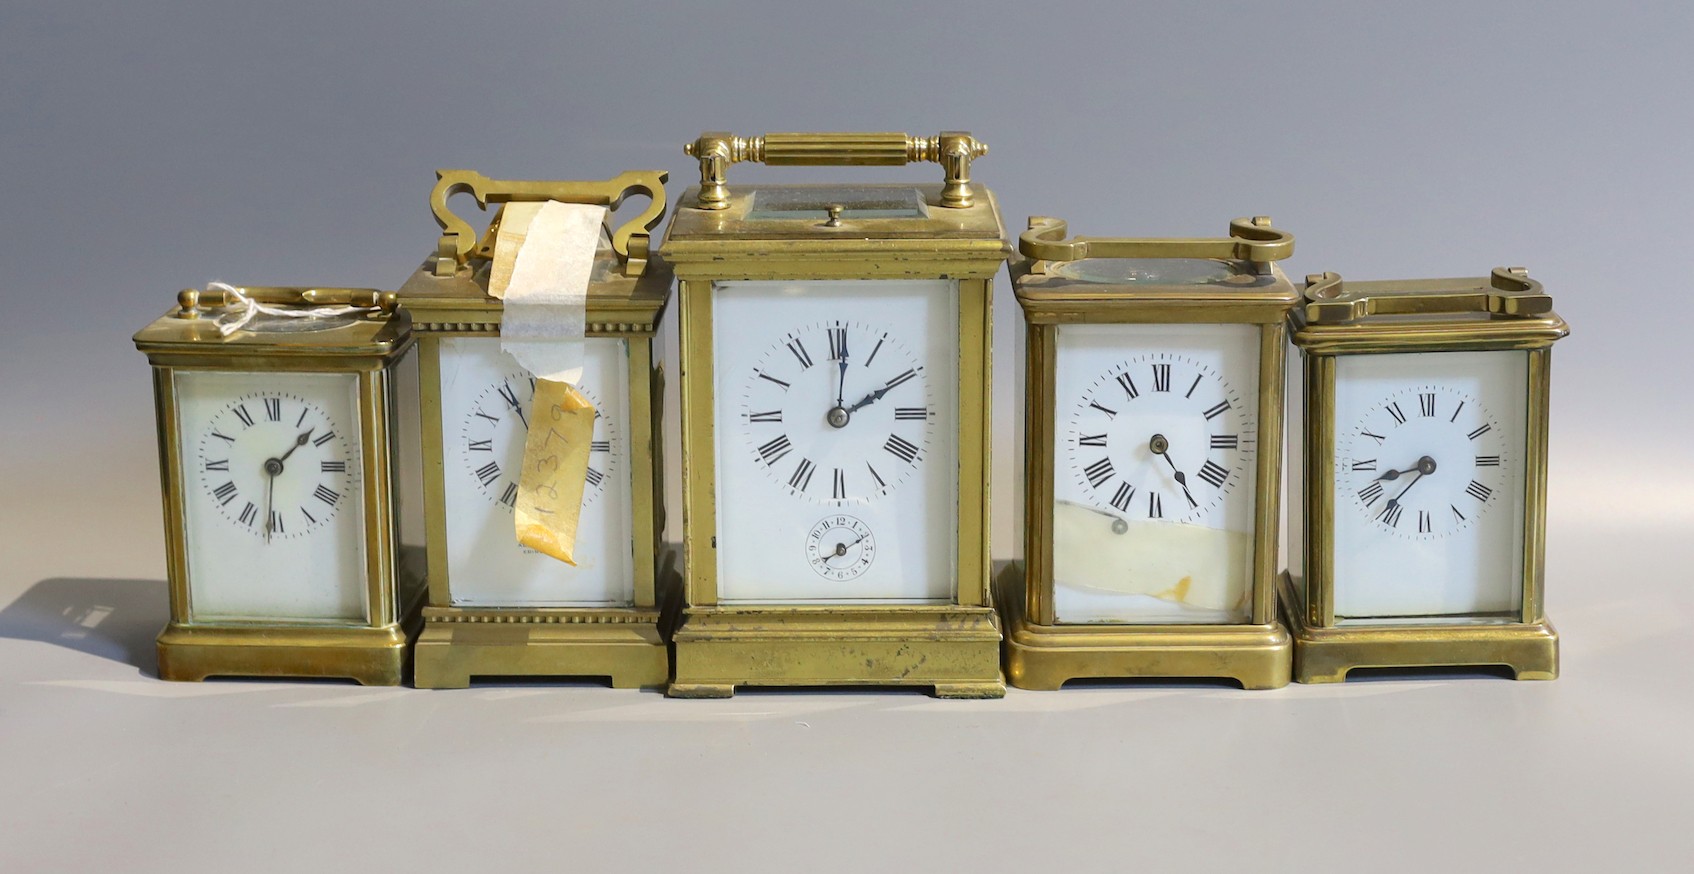 Five early 20th century and later lacquered brass carriage clocks and timepieces, in varying states of repair